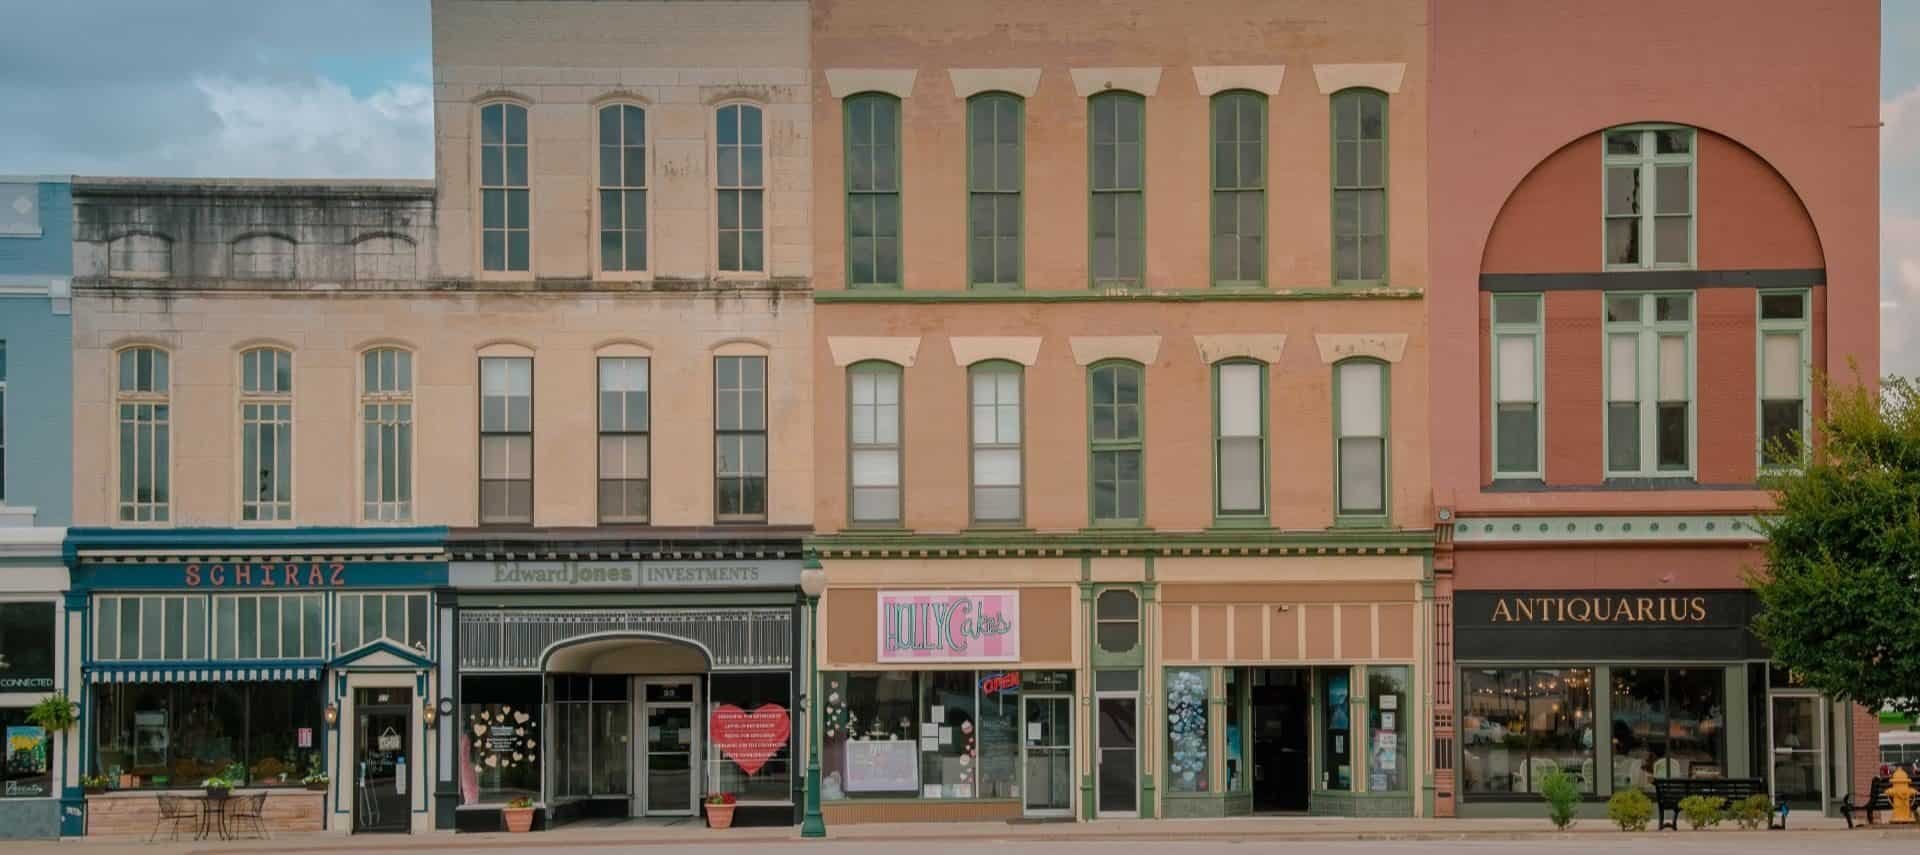 Multiple store fronts in a downtown setting